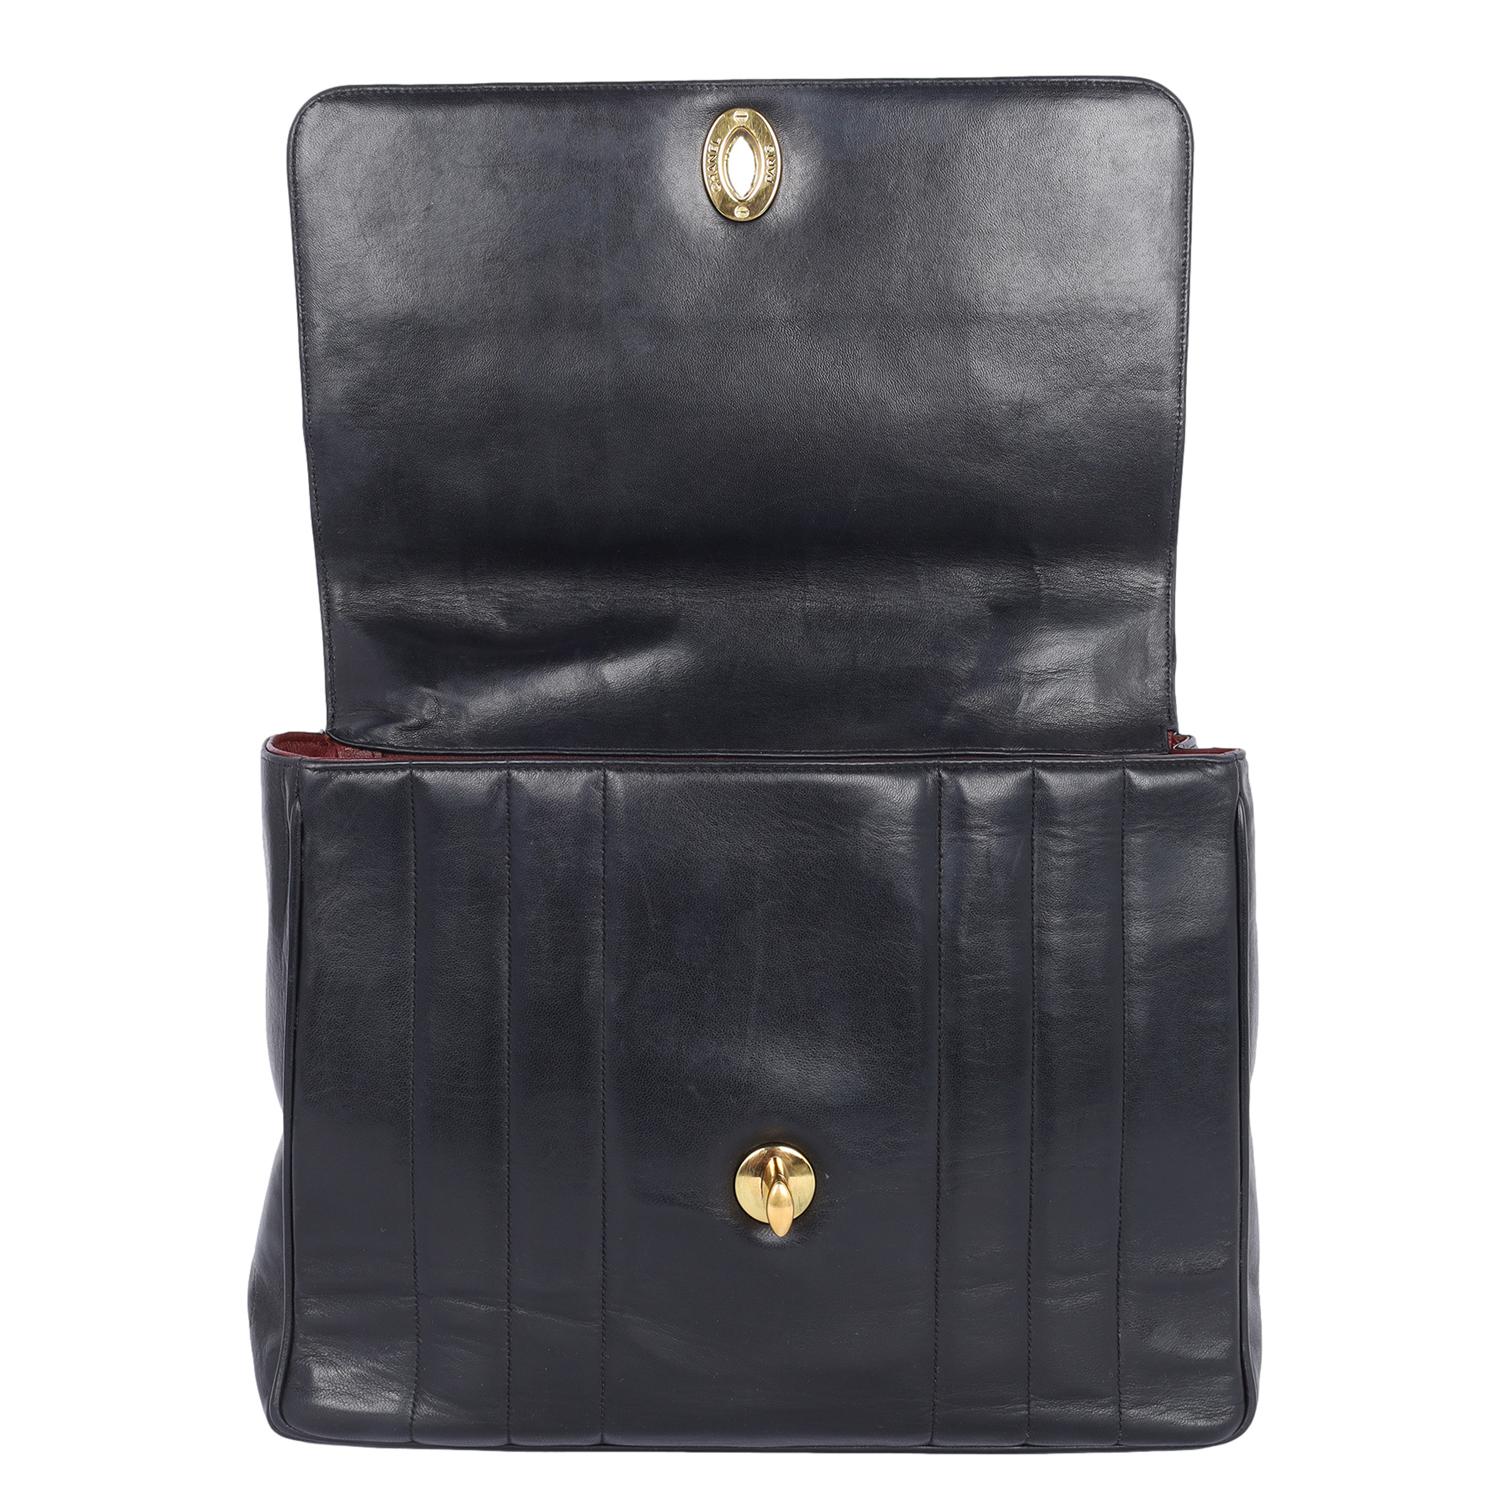 Authentic, pre-loved vintage Chanel mademoiselle Jumbo black front flap top handle bag. Features black lambskin leather, top handle, rear slip pocket, front flap closure, turn-lock, and large CC with 24kt gold plated hardware, the interior has a